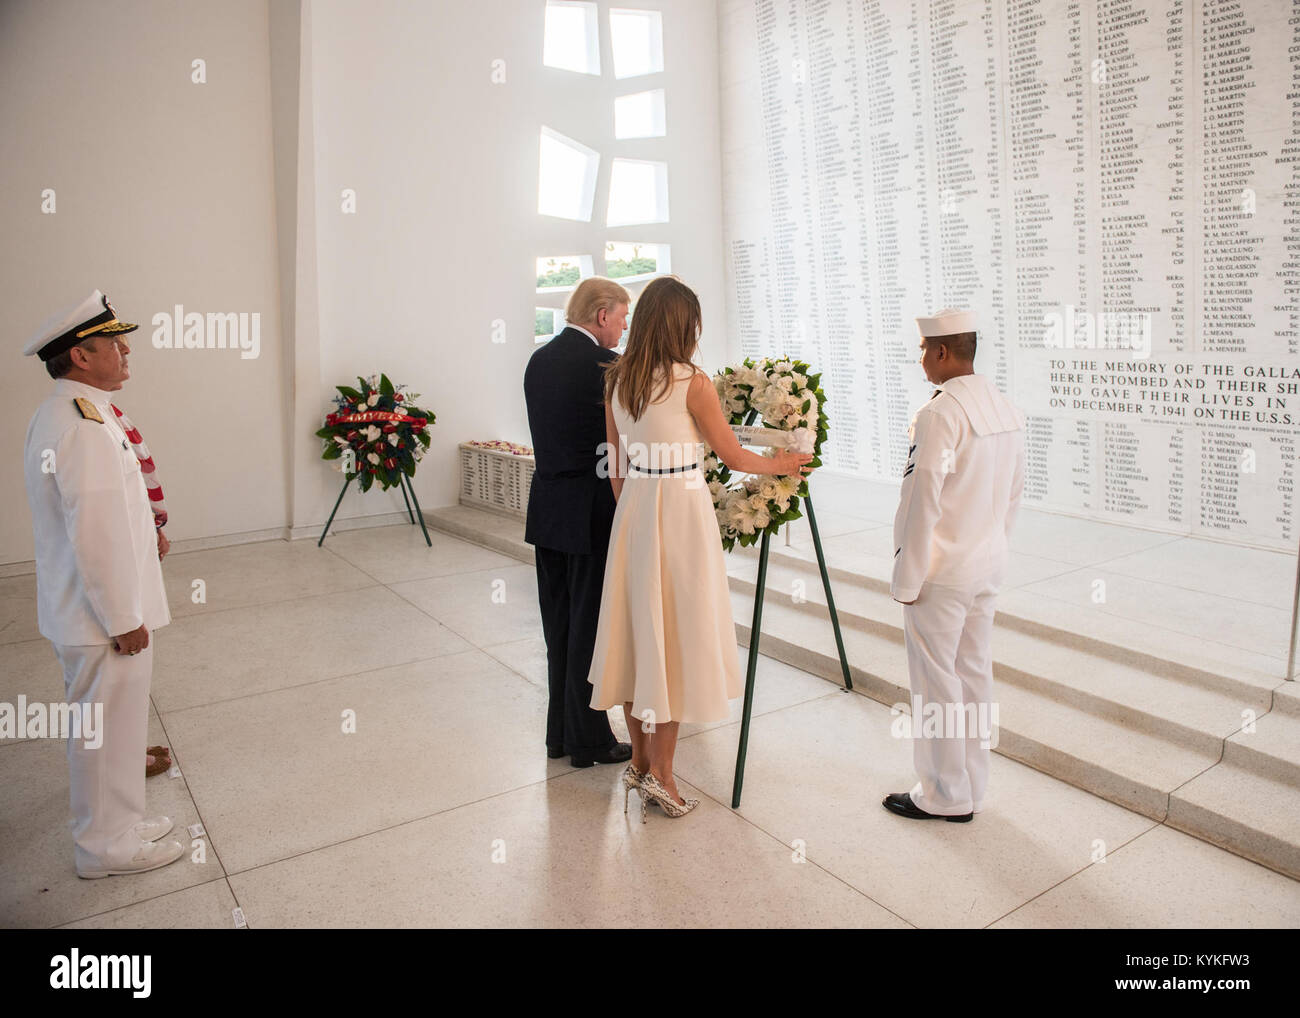 171103-N-ON707-197 PEARL HARBOR, Hawaii (Nov. 3, 2017) U.S. Pacific Command (USPACOM) Commander, Adm. Harry Harris, observes President Donald J. Trump and First Lady Melania Trump as they present a wreath in honor of fallen service members at the USS Arizona Memorial. The President is in Hawaii to receive a briefing from USPACOM prior to traveling to Japan, the Republic of Korea, China, Vietnam and the Philippines from November 3-14. During the trip the President will underscore his commitment to longstanding U.S. alliances and partnerships, and reaffirm U.S. leadership in promoting a free and Stock Photo